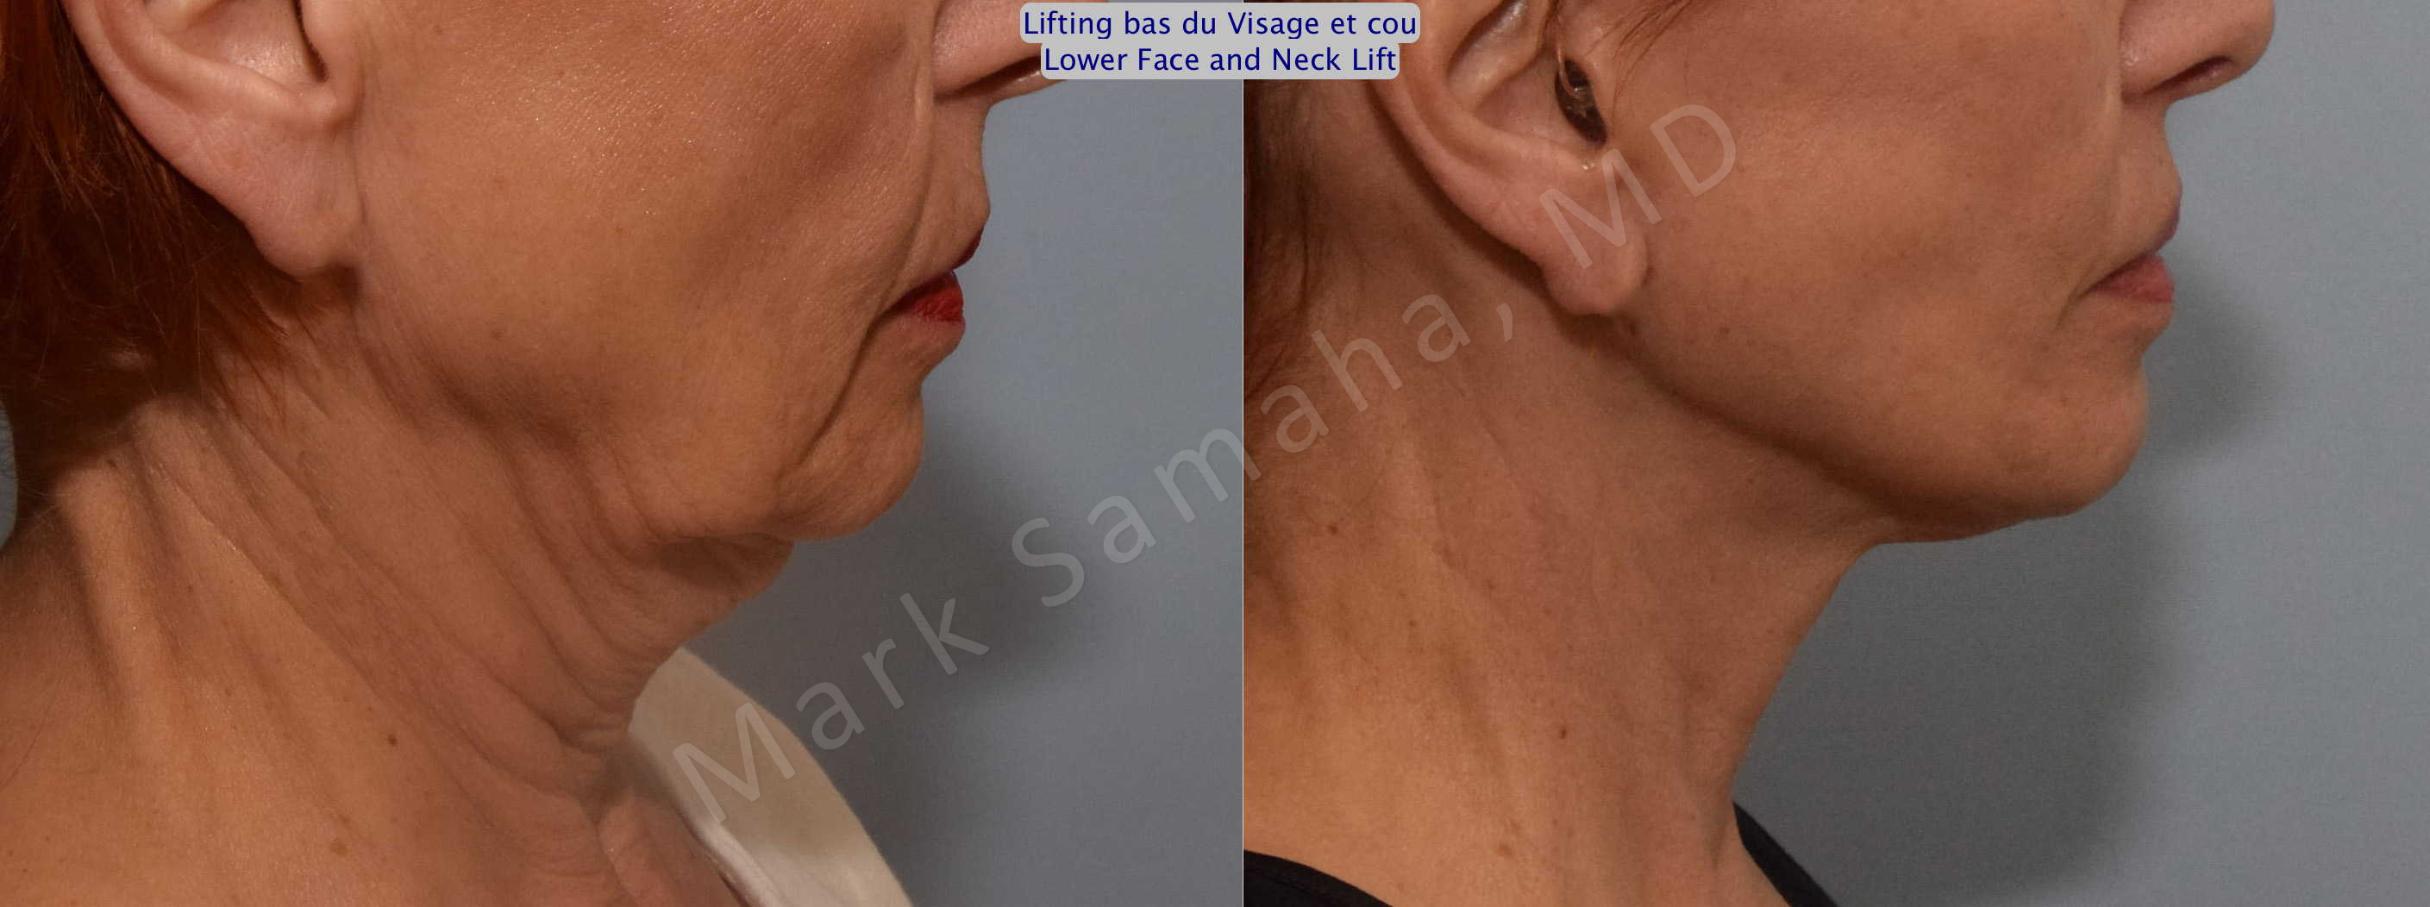 Before & After Facelift / Necklift - Lifting du visage / Cou Case 116 View #4 View in Mount Royal, QC